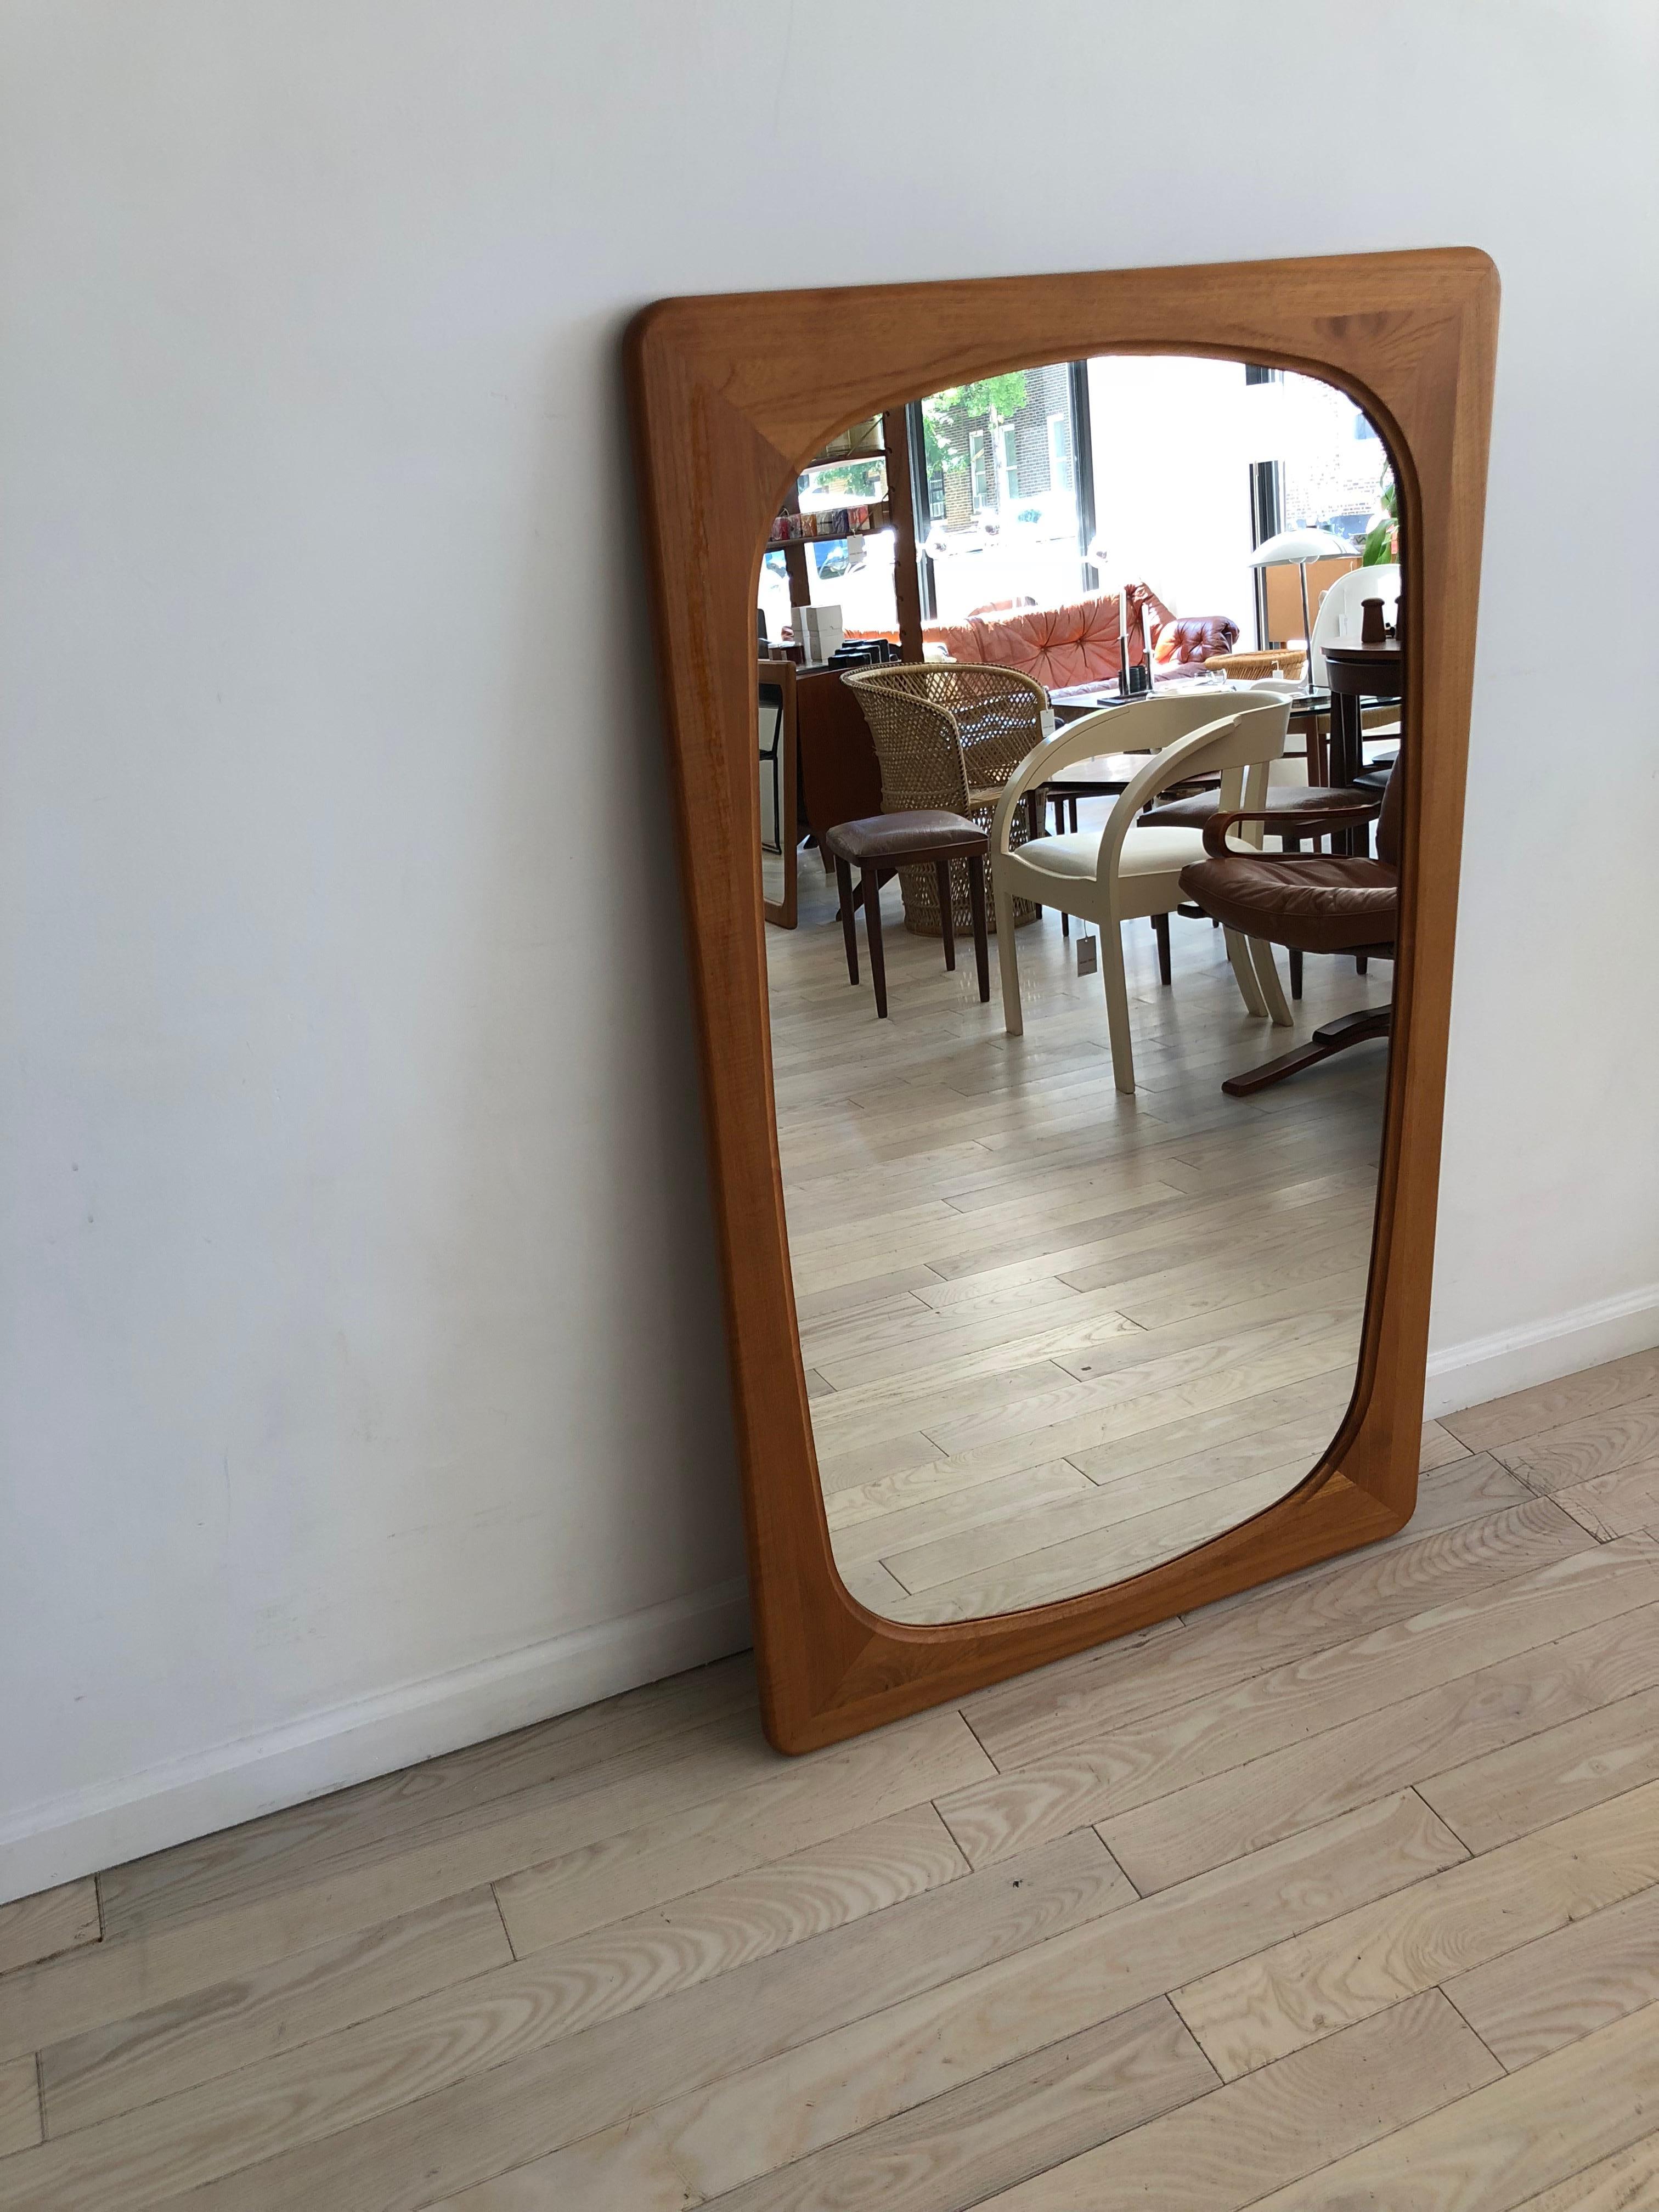 Beautiful 1960s, full sized Danish modern teak mirror for Fakse Furniture. Finely crafted teak wood frame, pretty joinery and teak grain. Large glass mirror is exceptionally clean, with no scratches. Hardware on the back allows for easy wall hanging